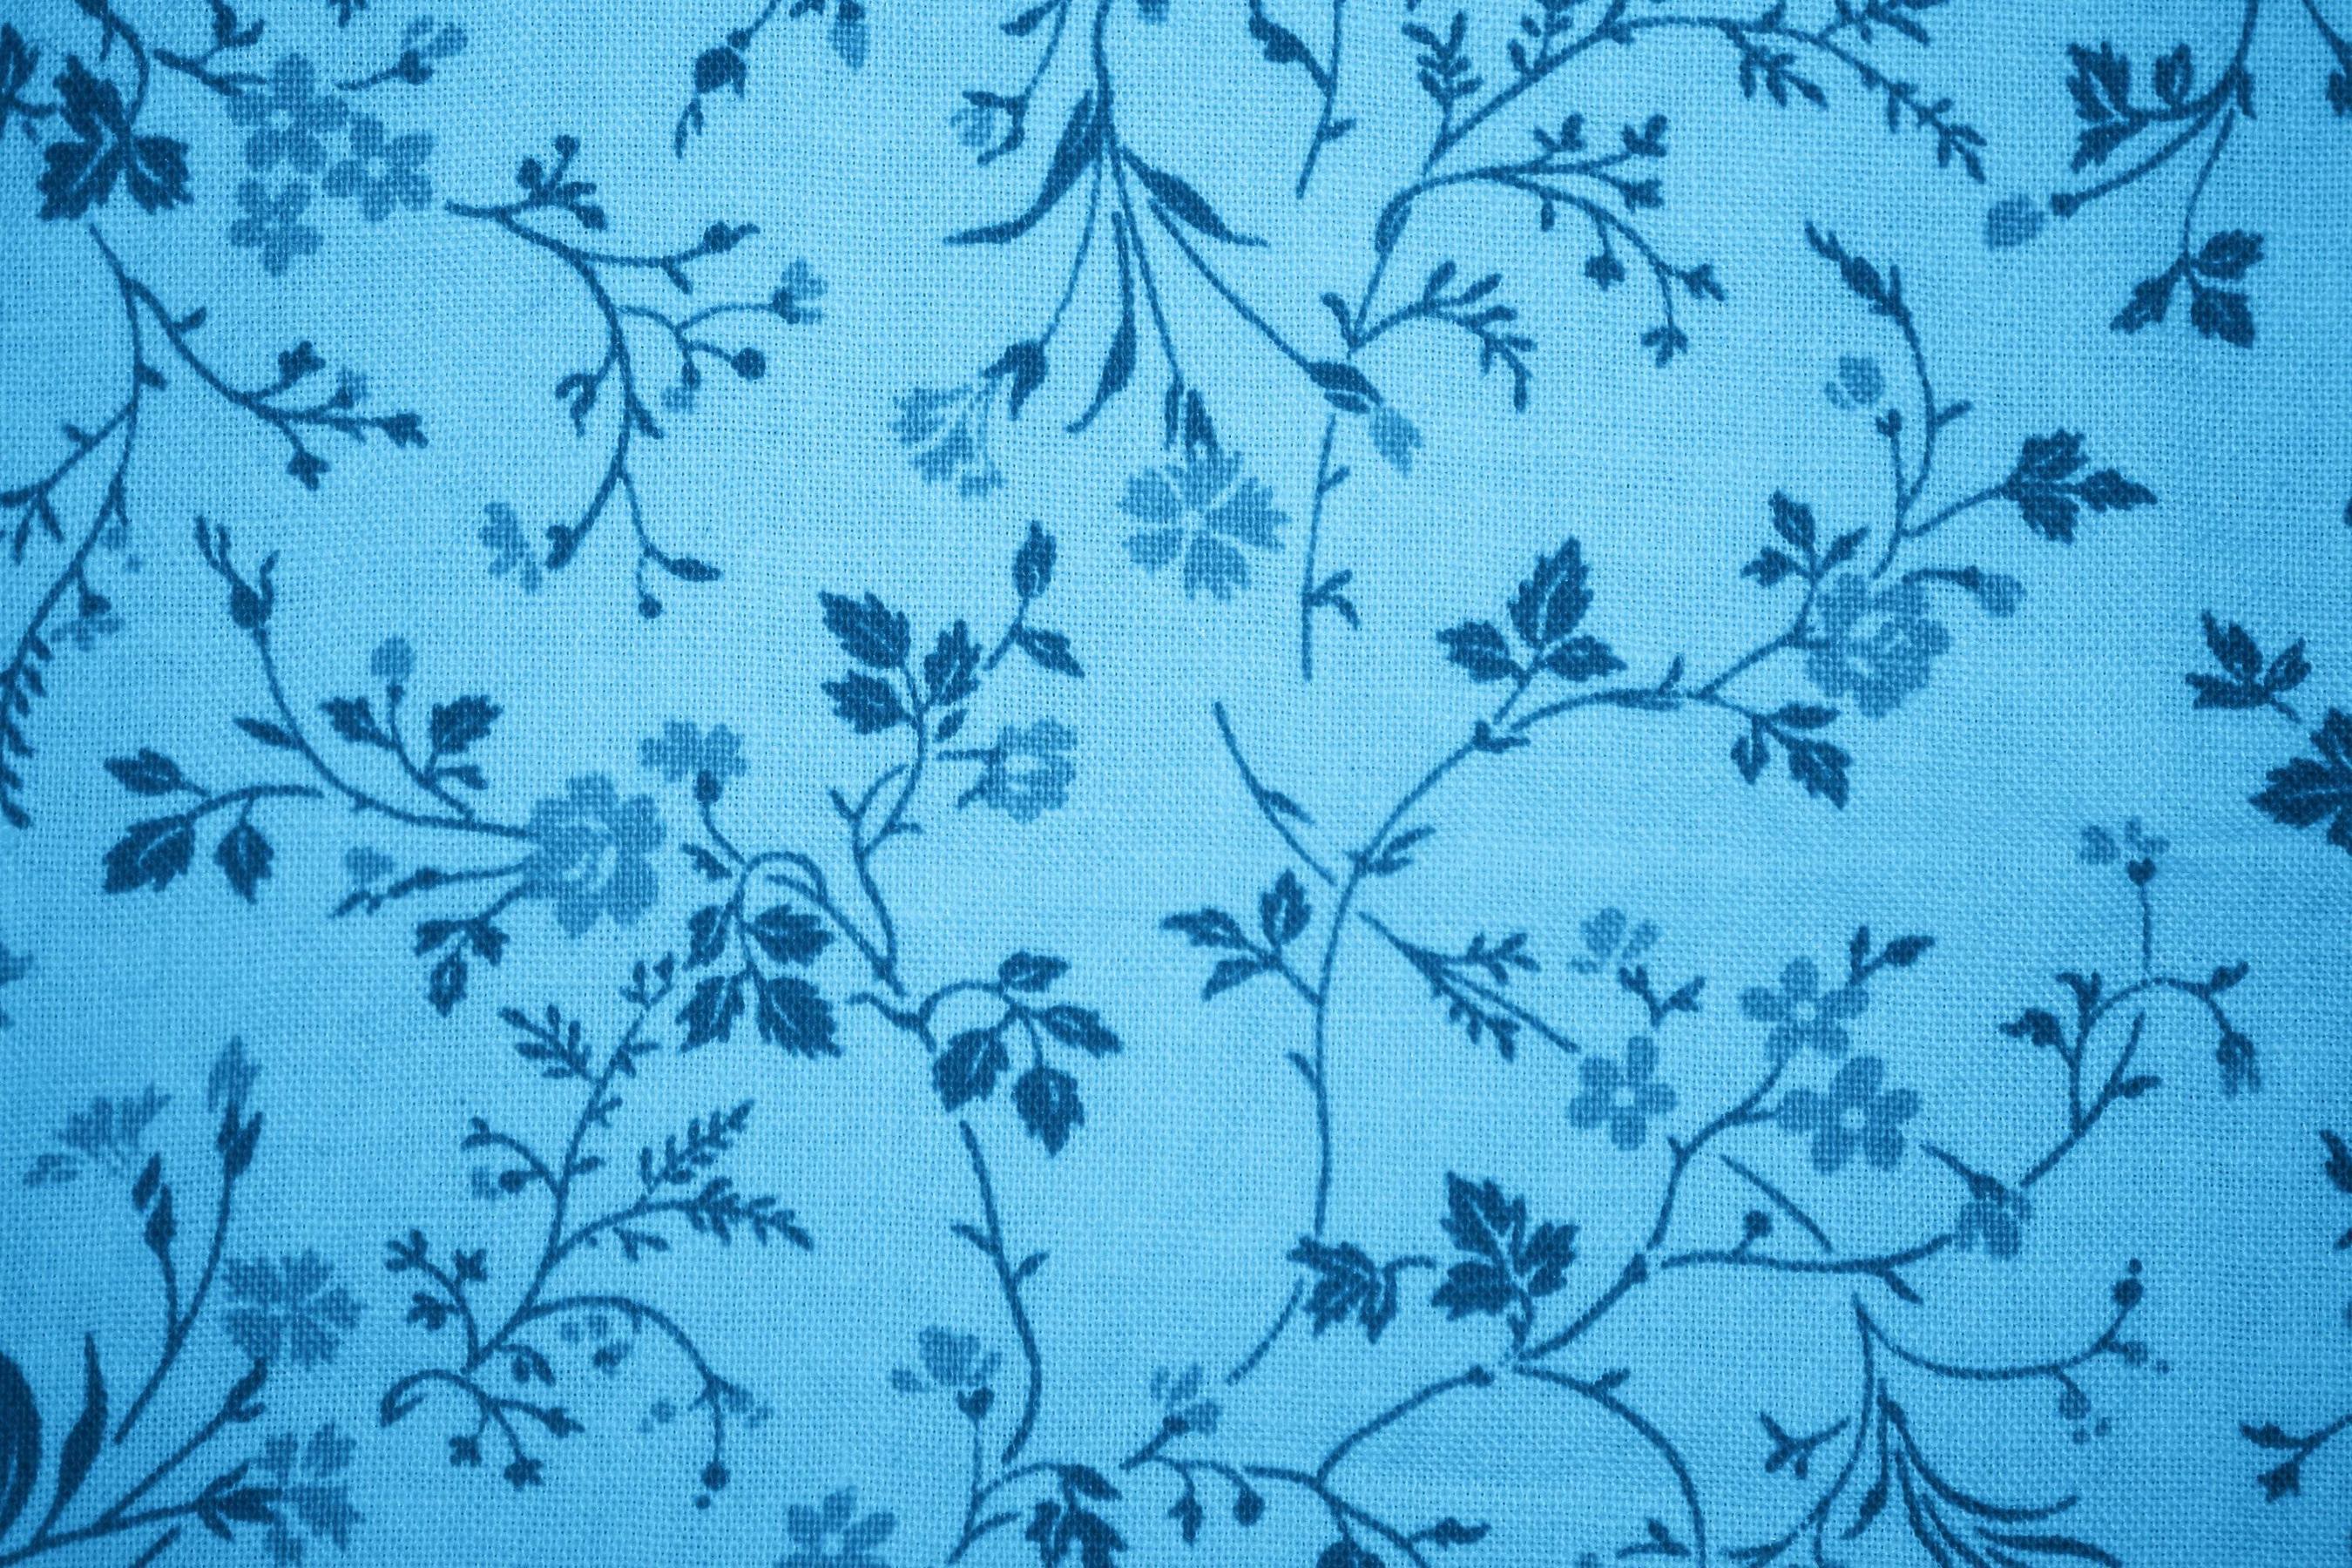 Sky Blue Floral Print Fabric Texture Picture. Free Photograph